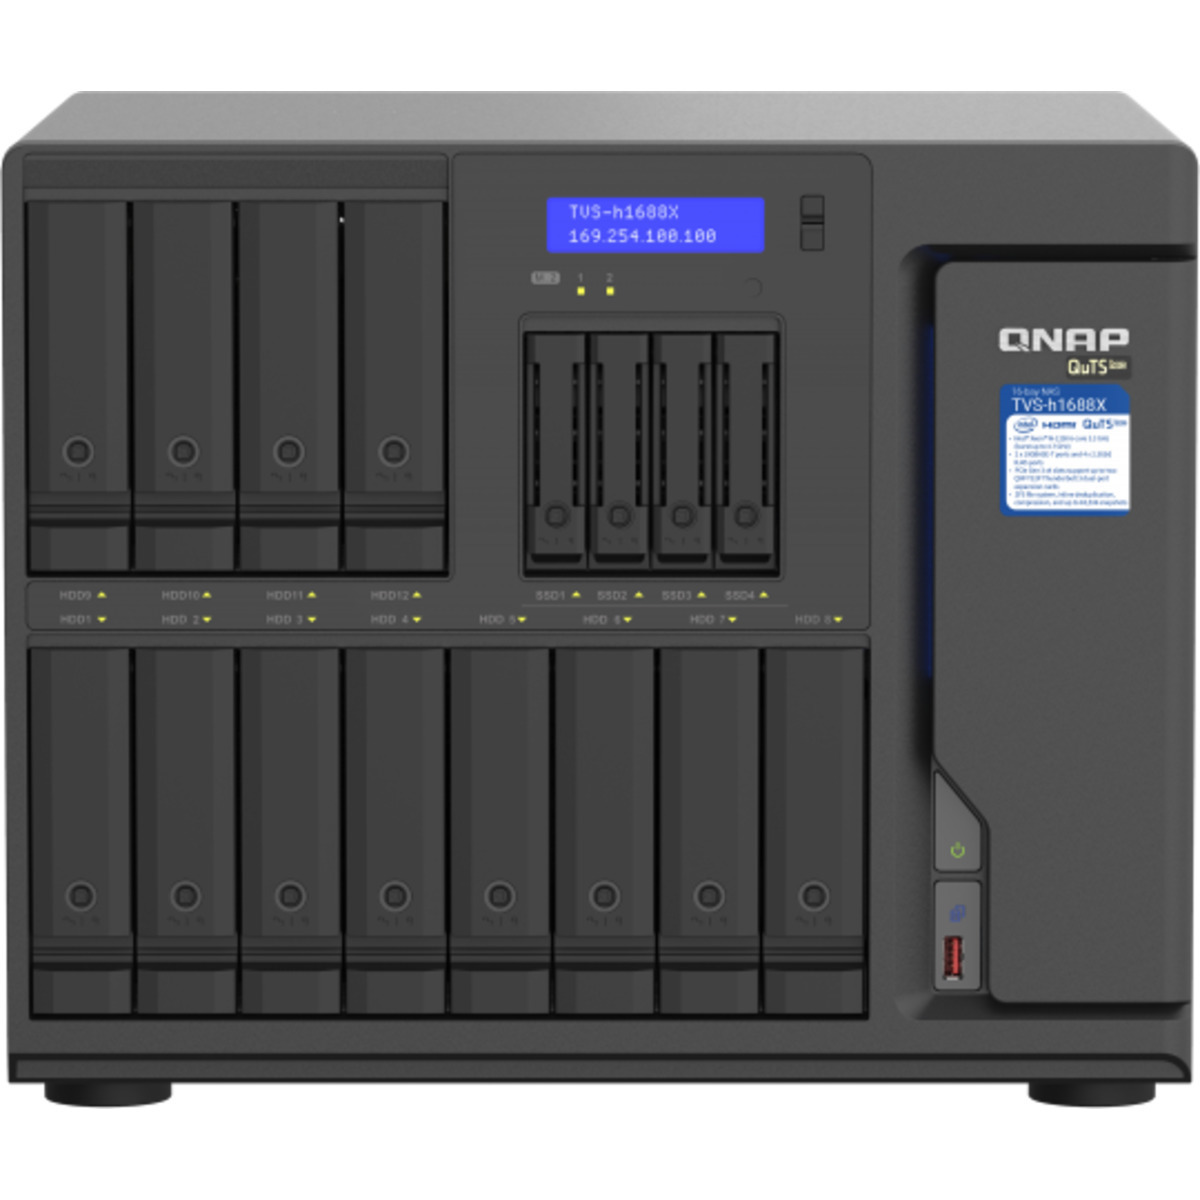 QNAP TVS-h1688X QuTS hero NAS 88tb 12+4-Bay Desktop Multimedia / Power User / Business NAS - Network Attached Storage Device 11x8tb Seagate IronWolf ST8000VN004 3.5 7200rpm SATA 6Gb/s HDD NAS Class Drives Installed - Burn-In Tested TVS-h1688X QuTS hero NAS